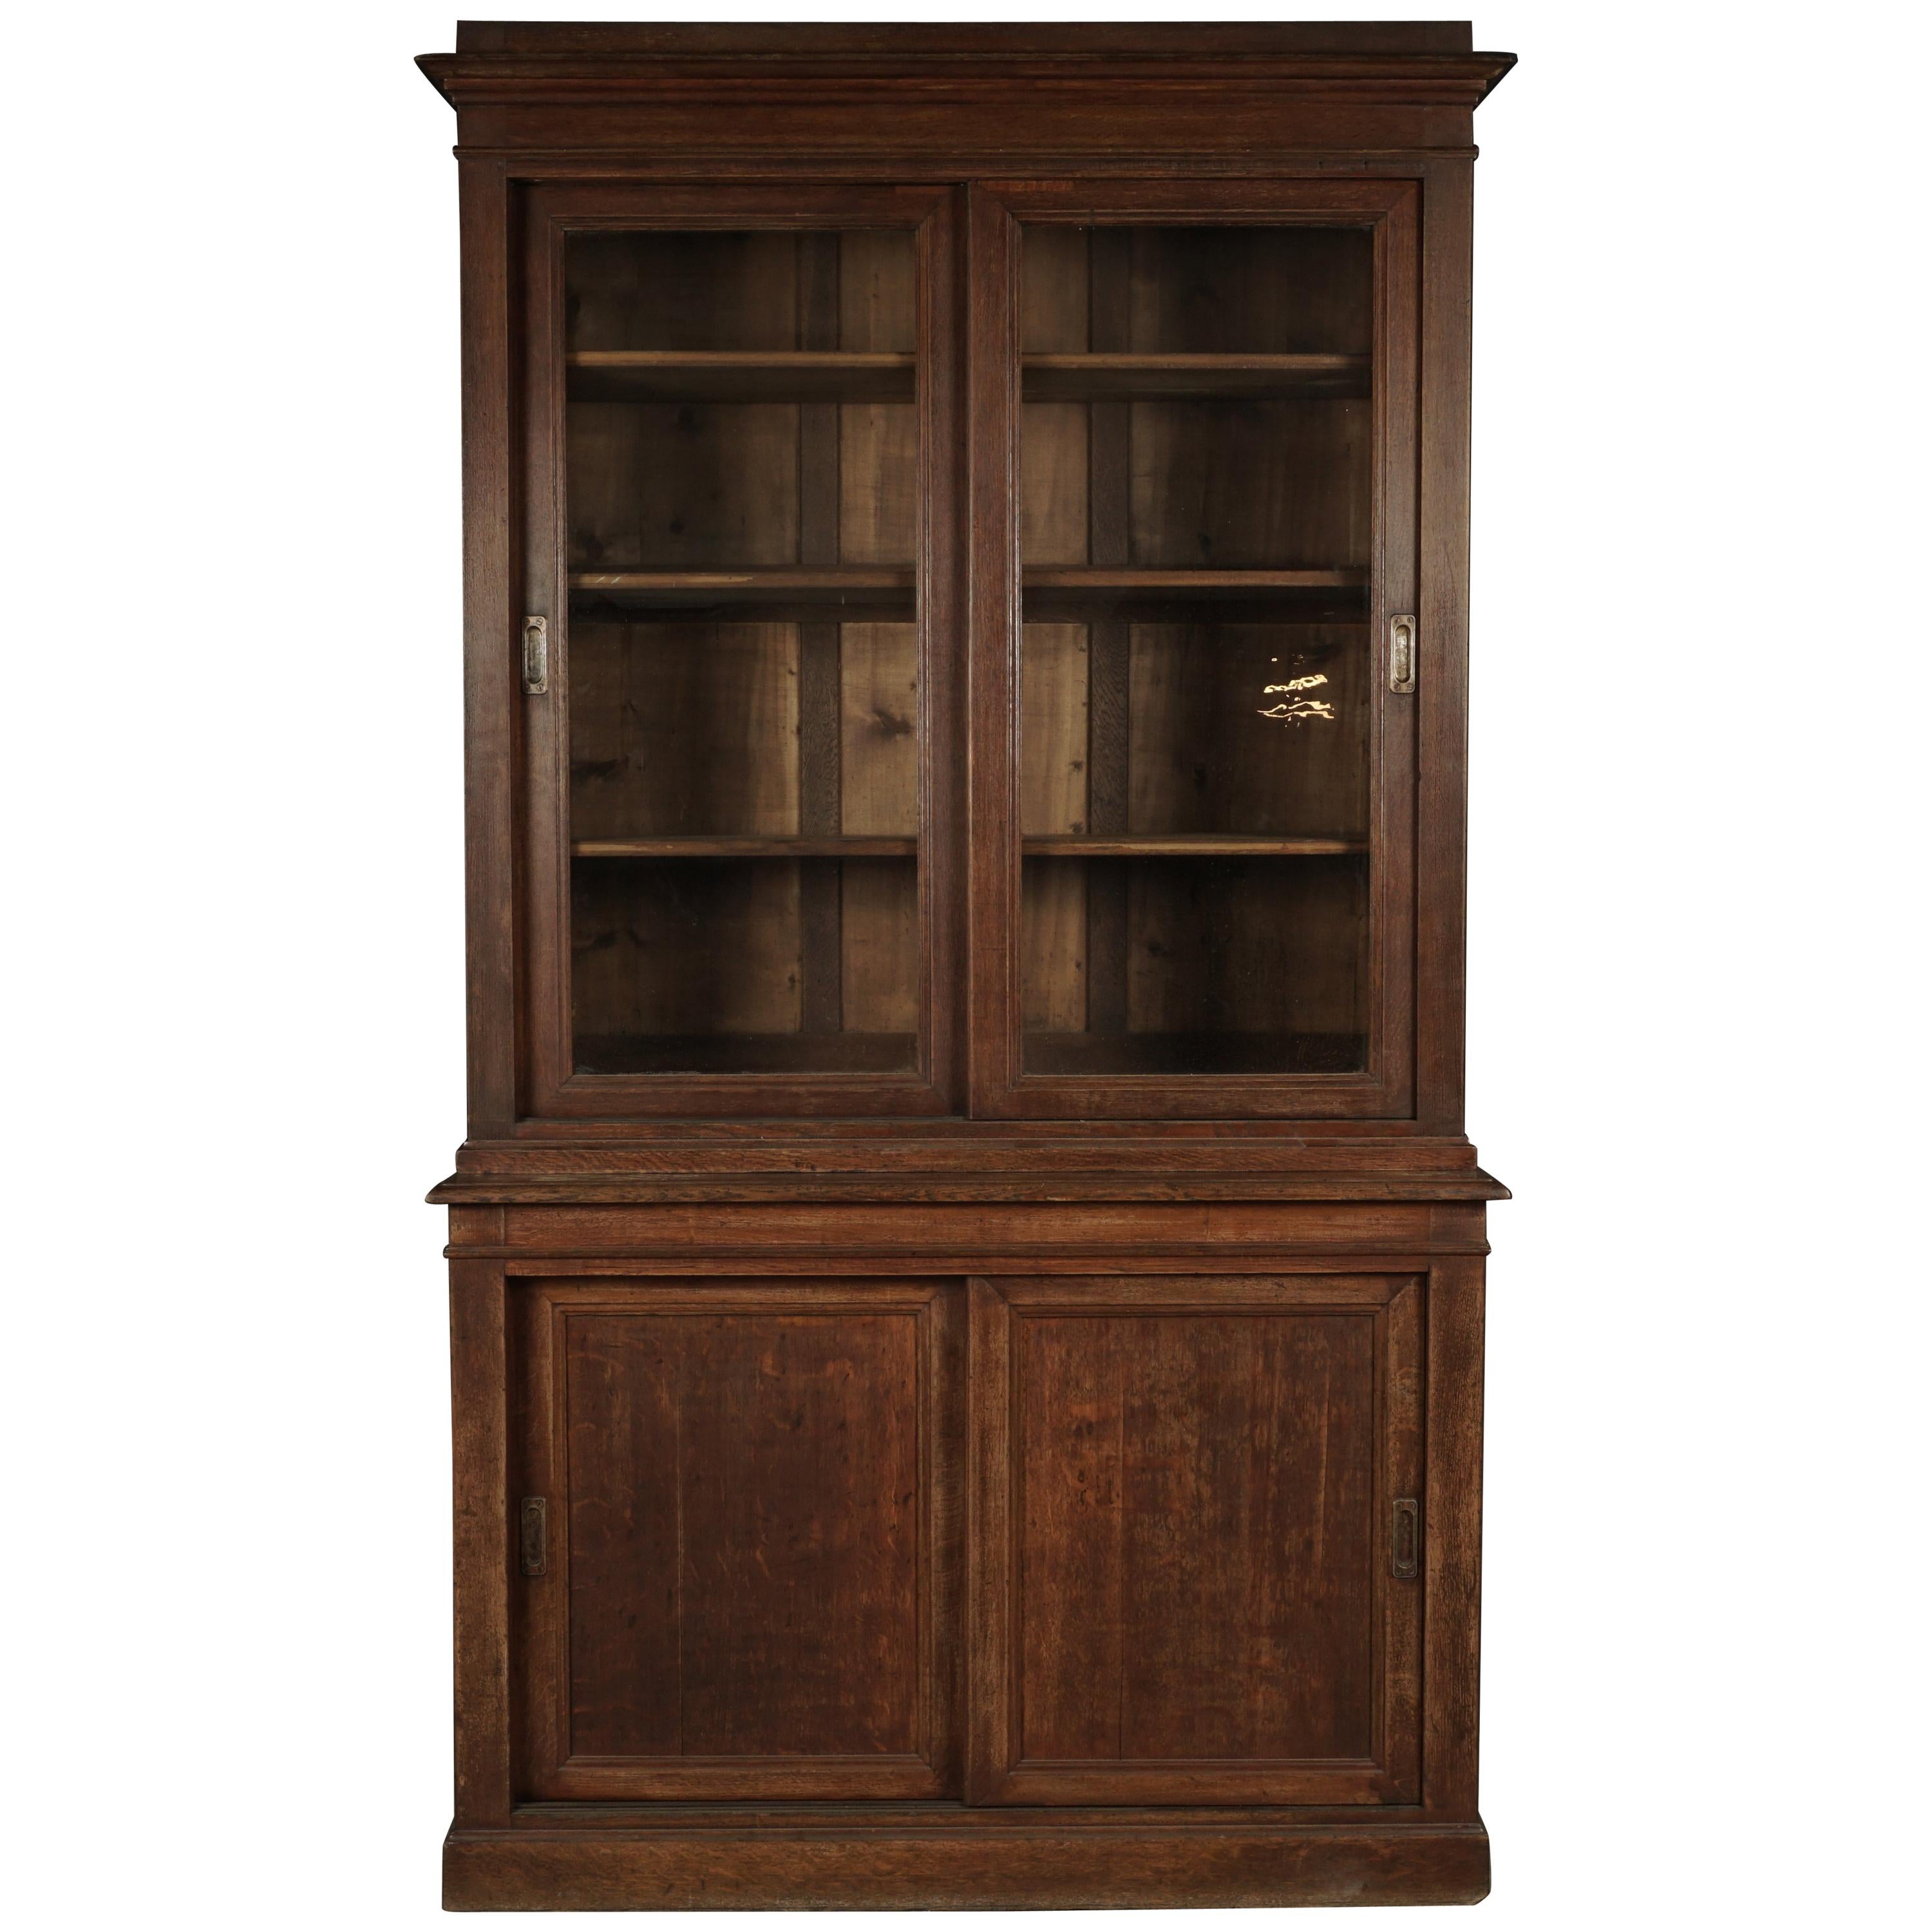 Early French Oak Cabinet with Sliding Doors, circa 1920